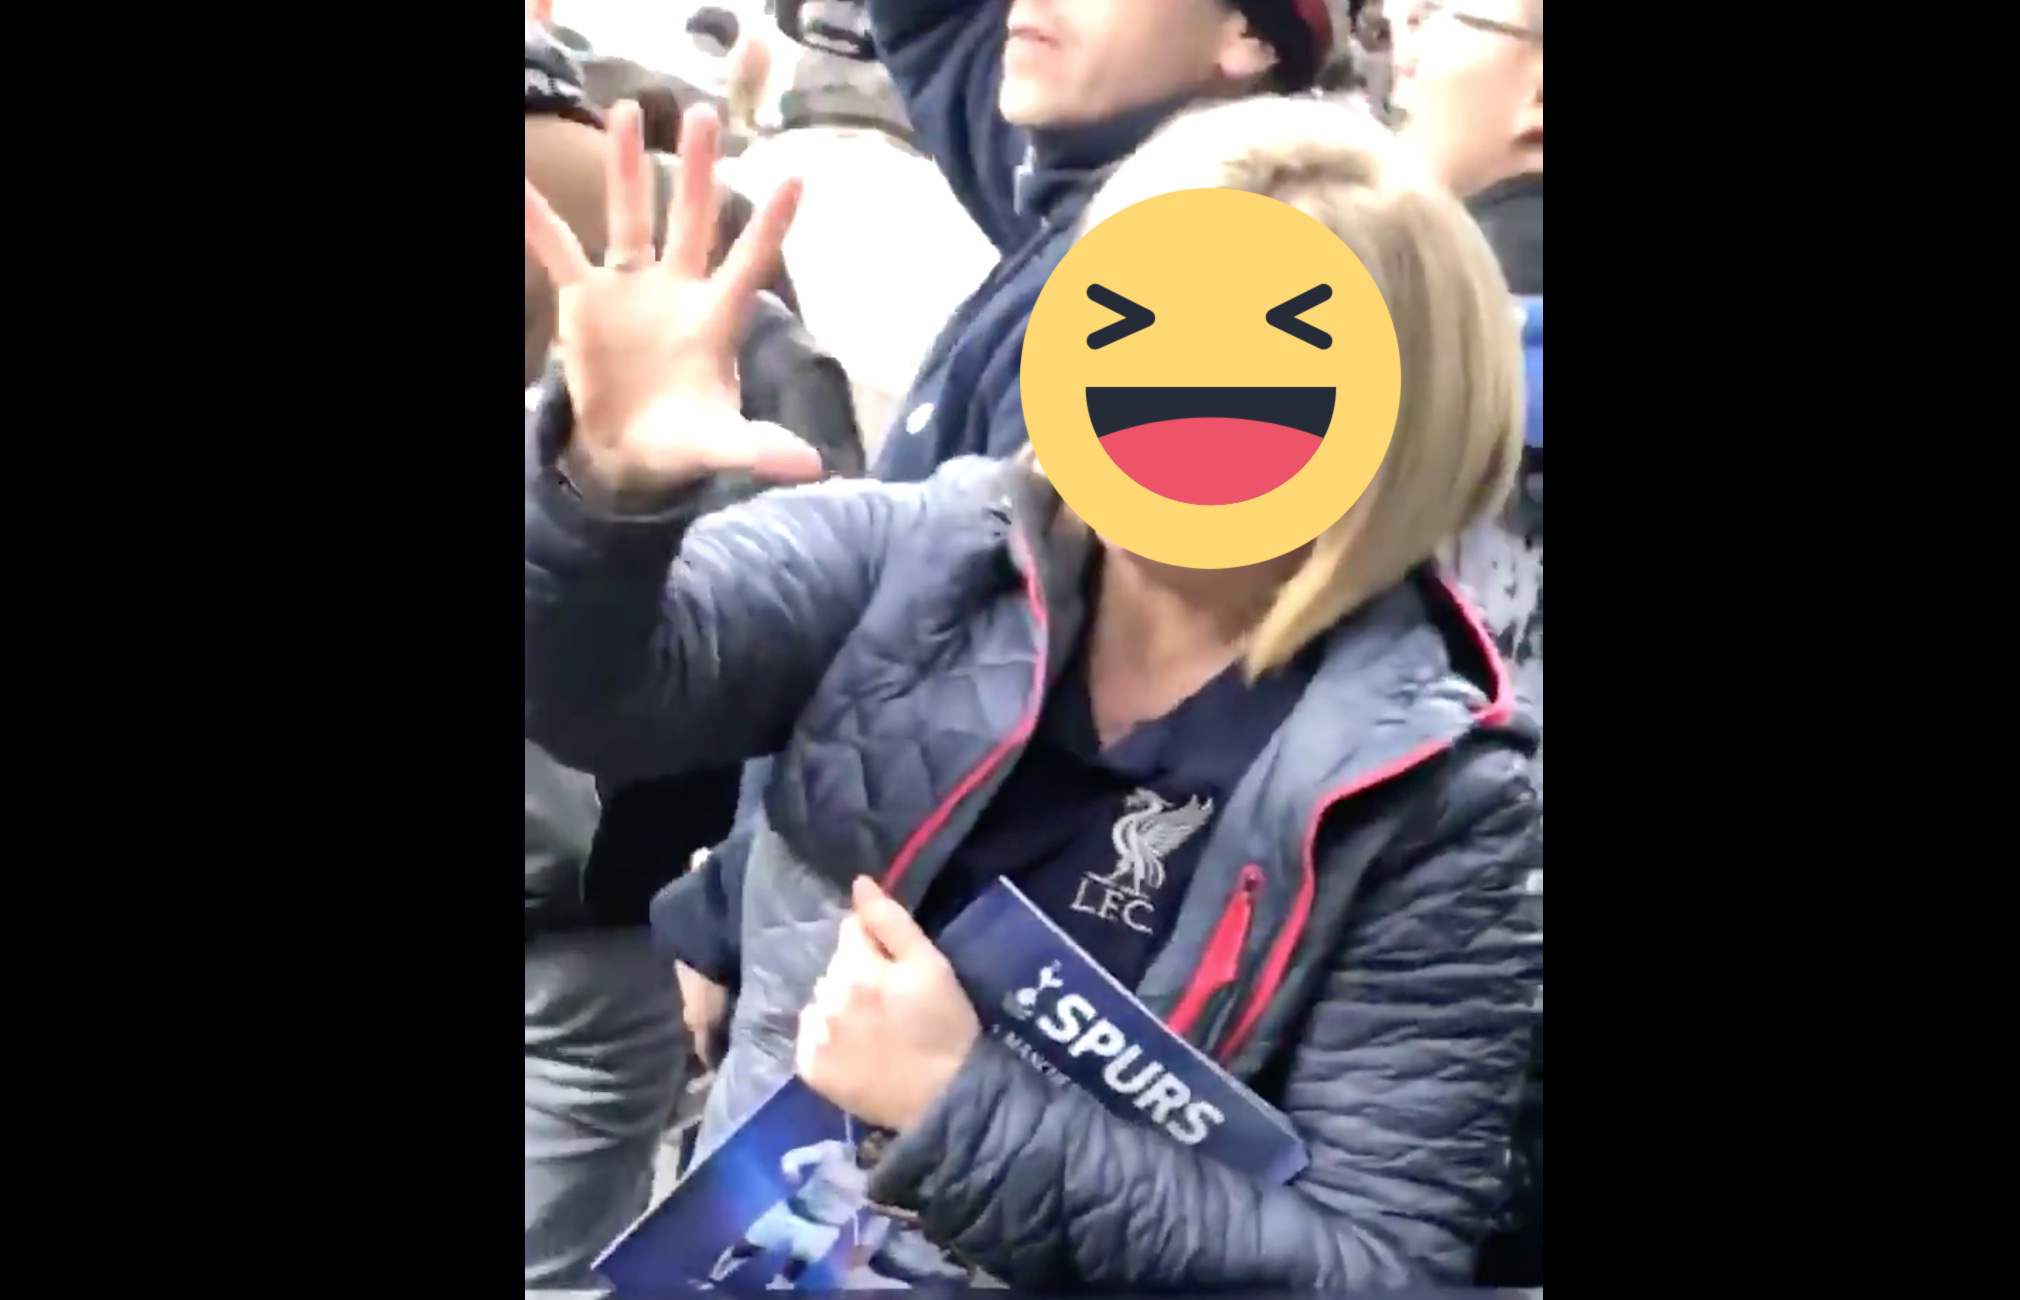 A female Liverpool supporter gatecrashed the Spurs end – trolled City fans while she was at it